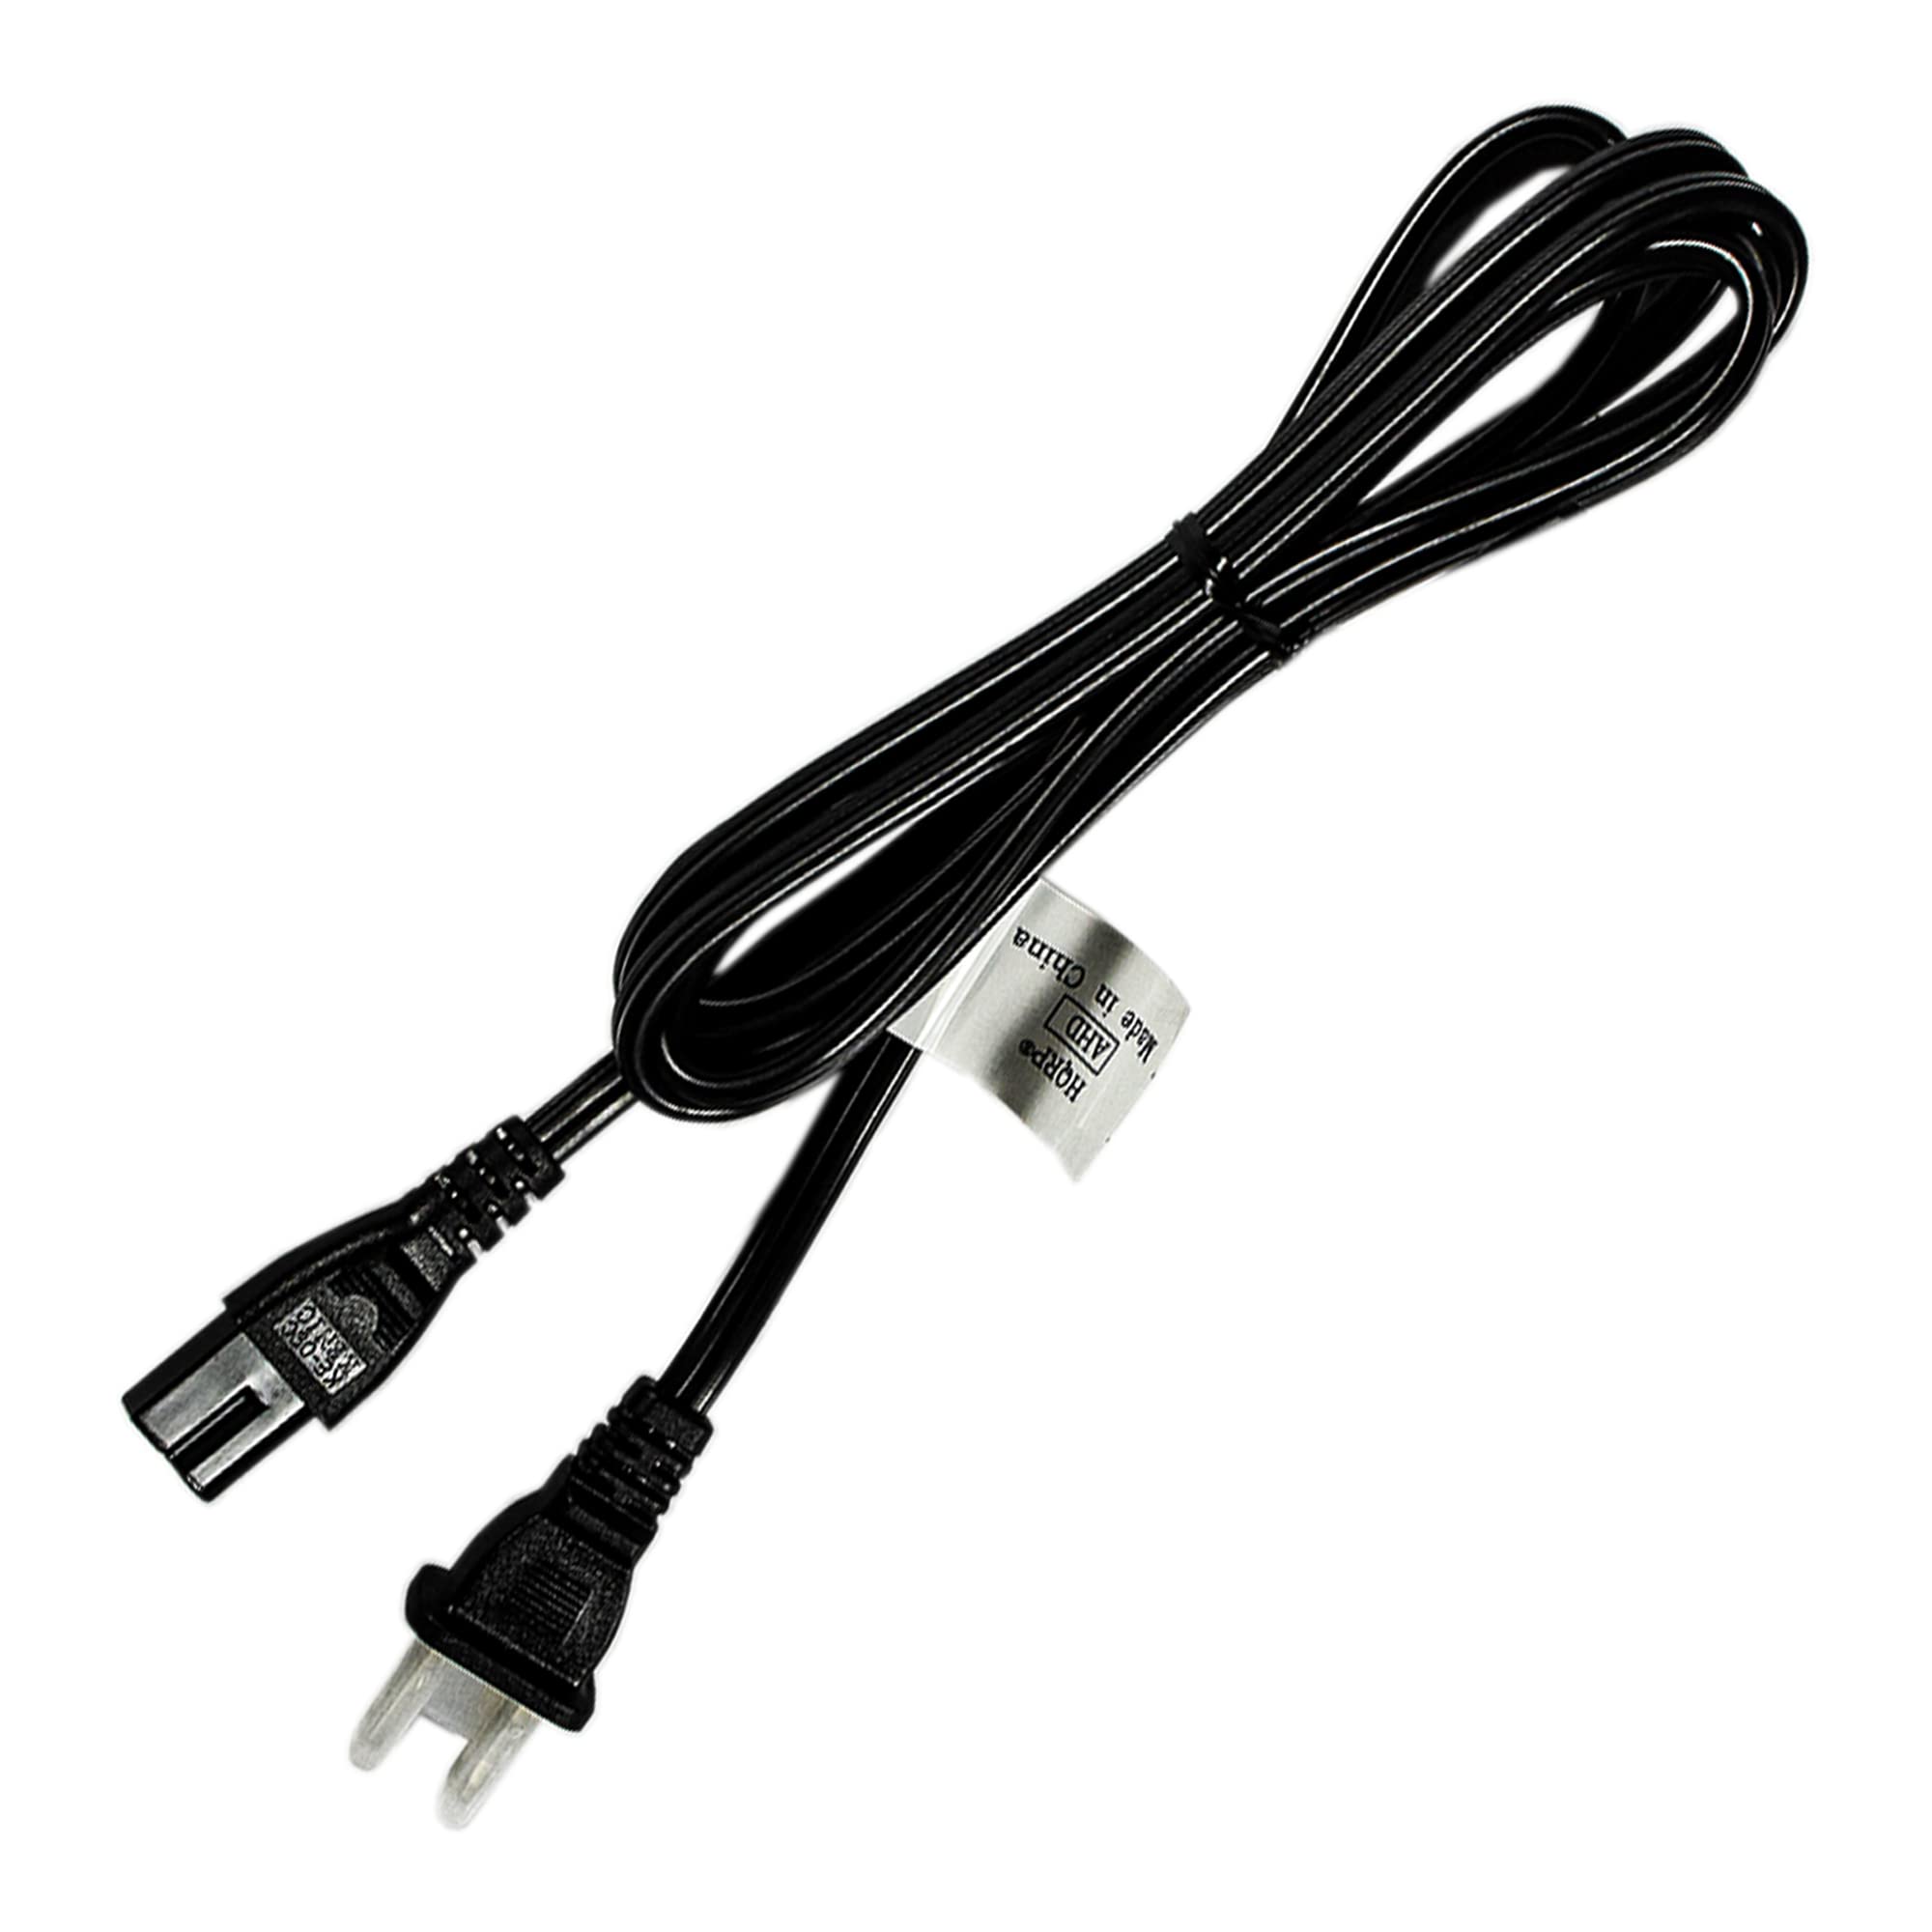 Ensure the power cable is securely connected to both the PS3 and the power outlet.
Try using a different power cable to rule out any issues with the current cable.